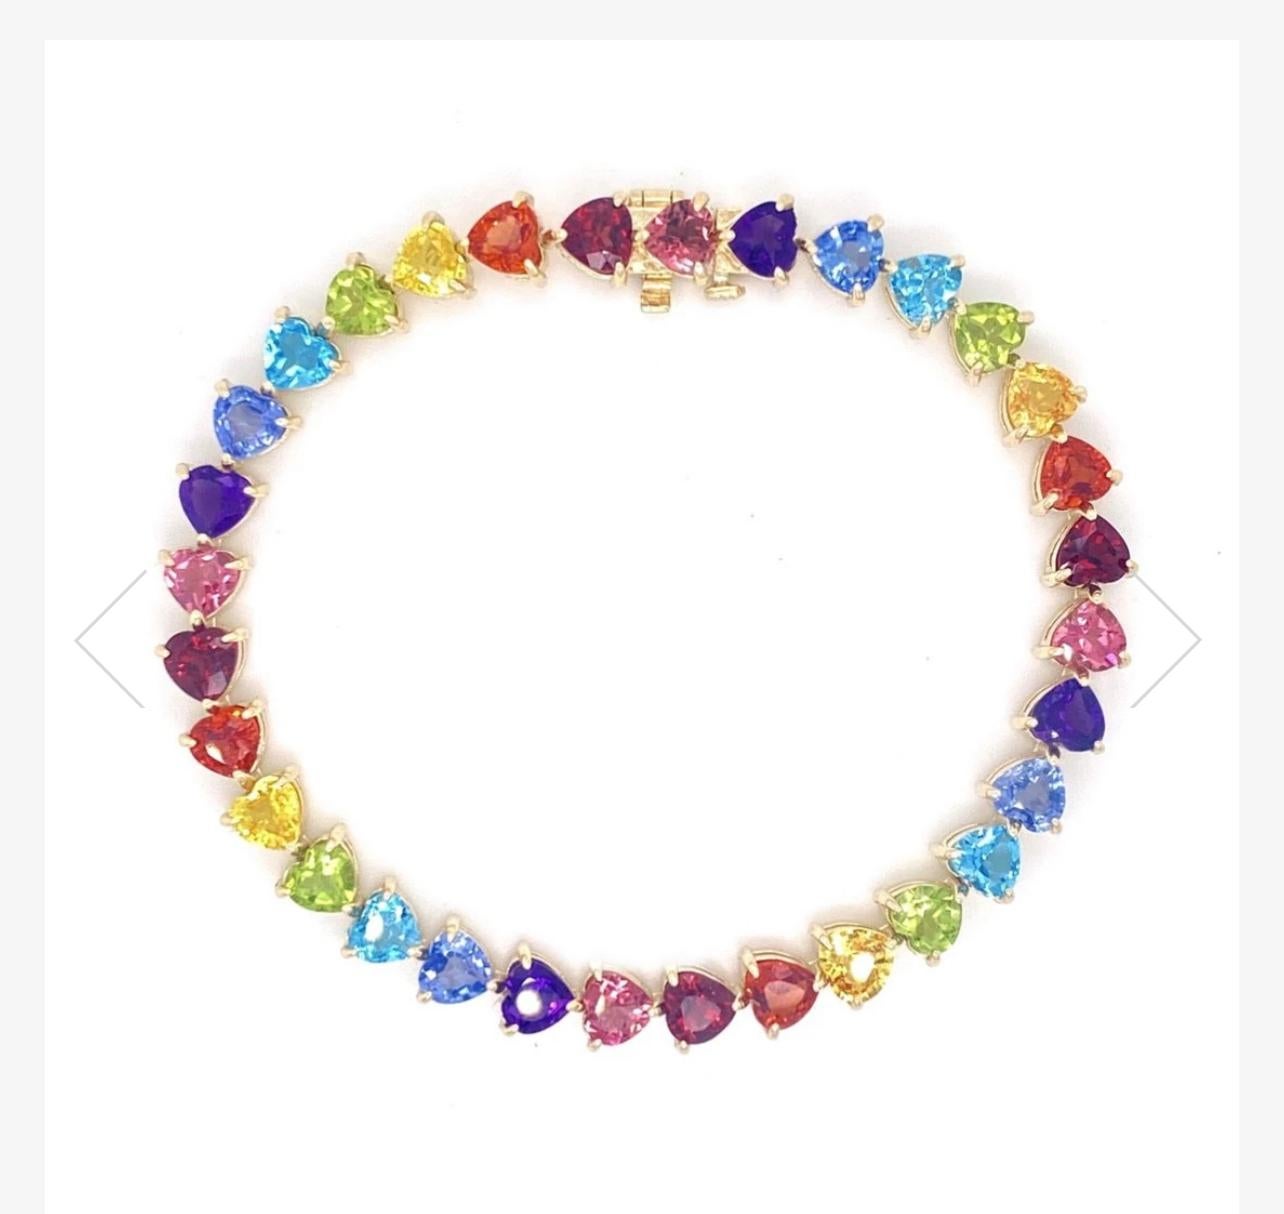 RAINBOW HEART TENNIS BRACELET

The full rainbow fantasy in the most unique and colorful bracelet to light up your life! This tennis bracelet is like no other consists of heart settings with colored gems and sapphires in the Classic Mordekai rainbow